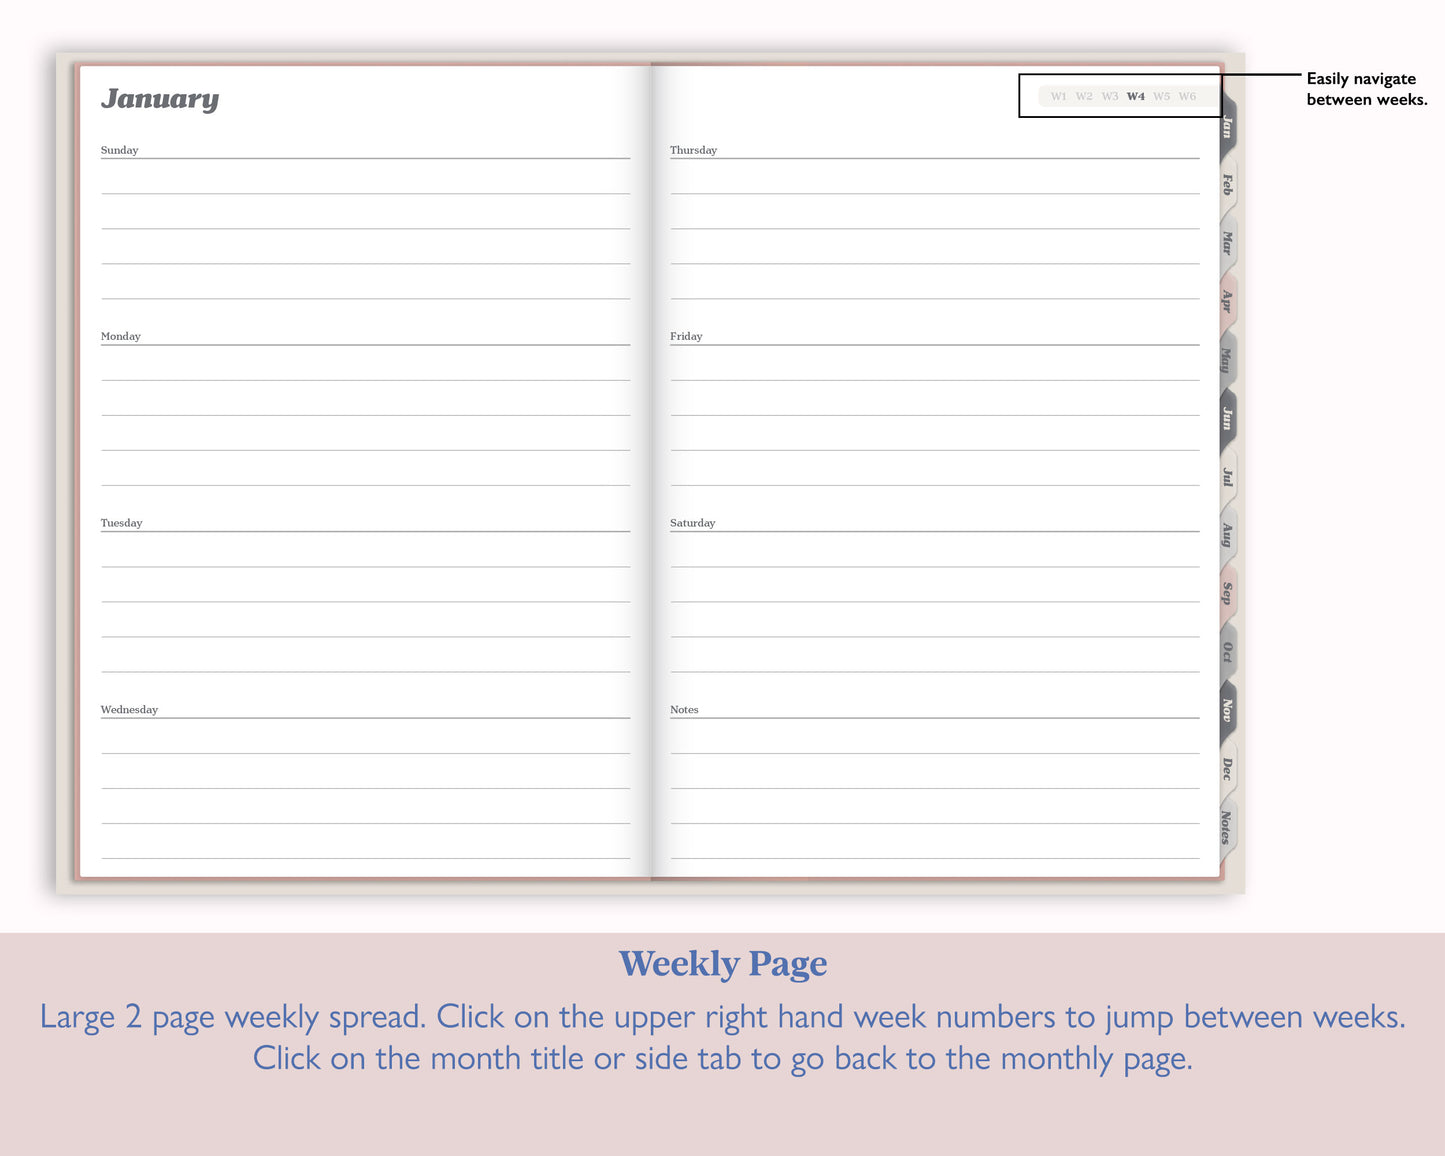 Undated Weekly Digital Planner | Realistic Two Page Landscape Planner